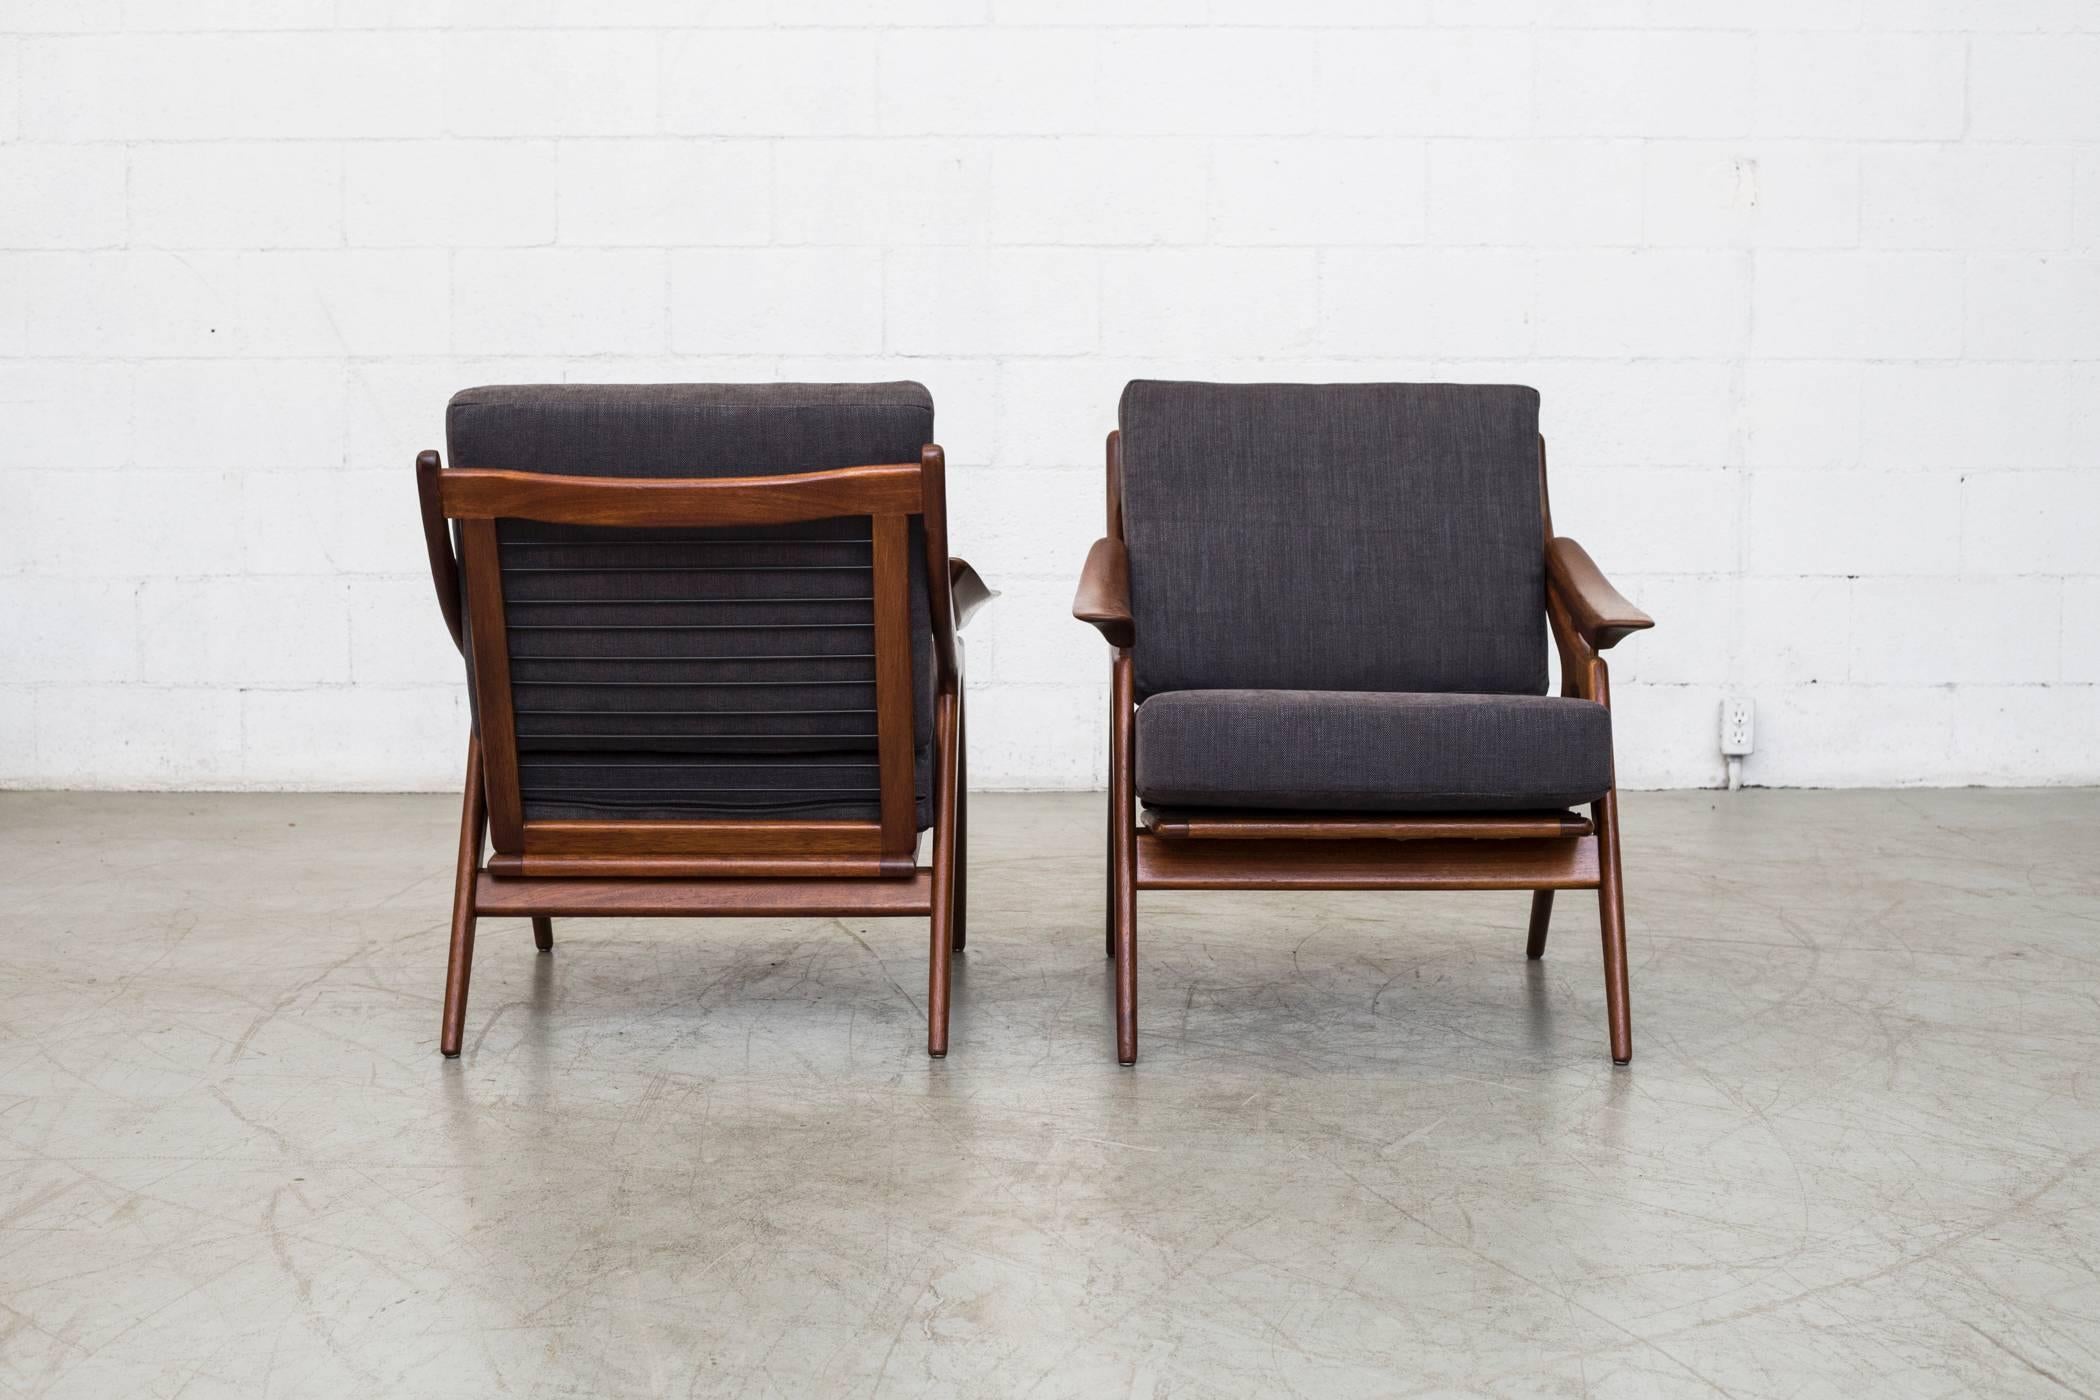 Dutch Pair of Mid-Century Organic Carved Teak Lounge Chair by De Ster